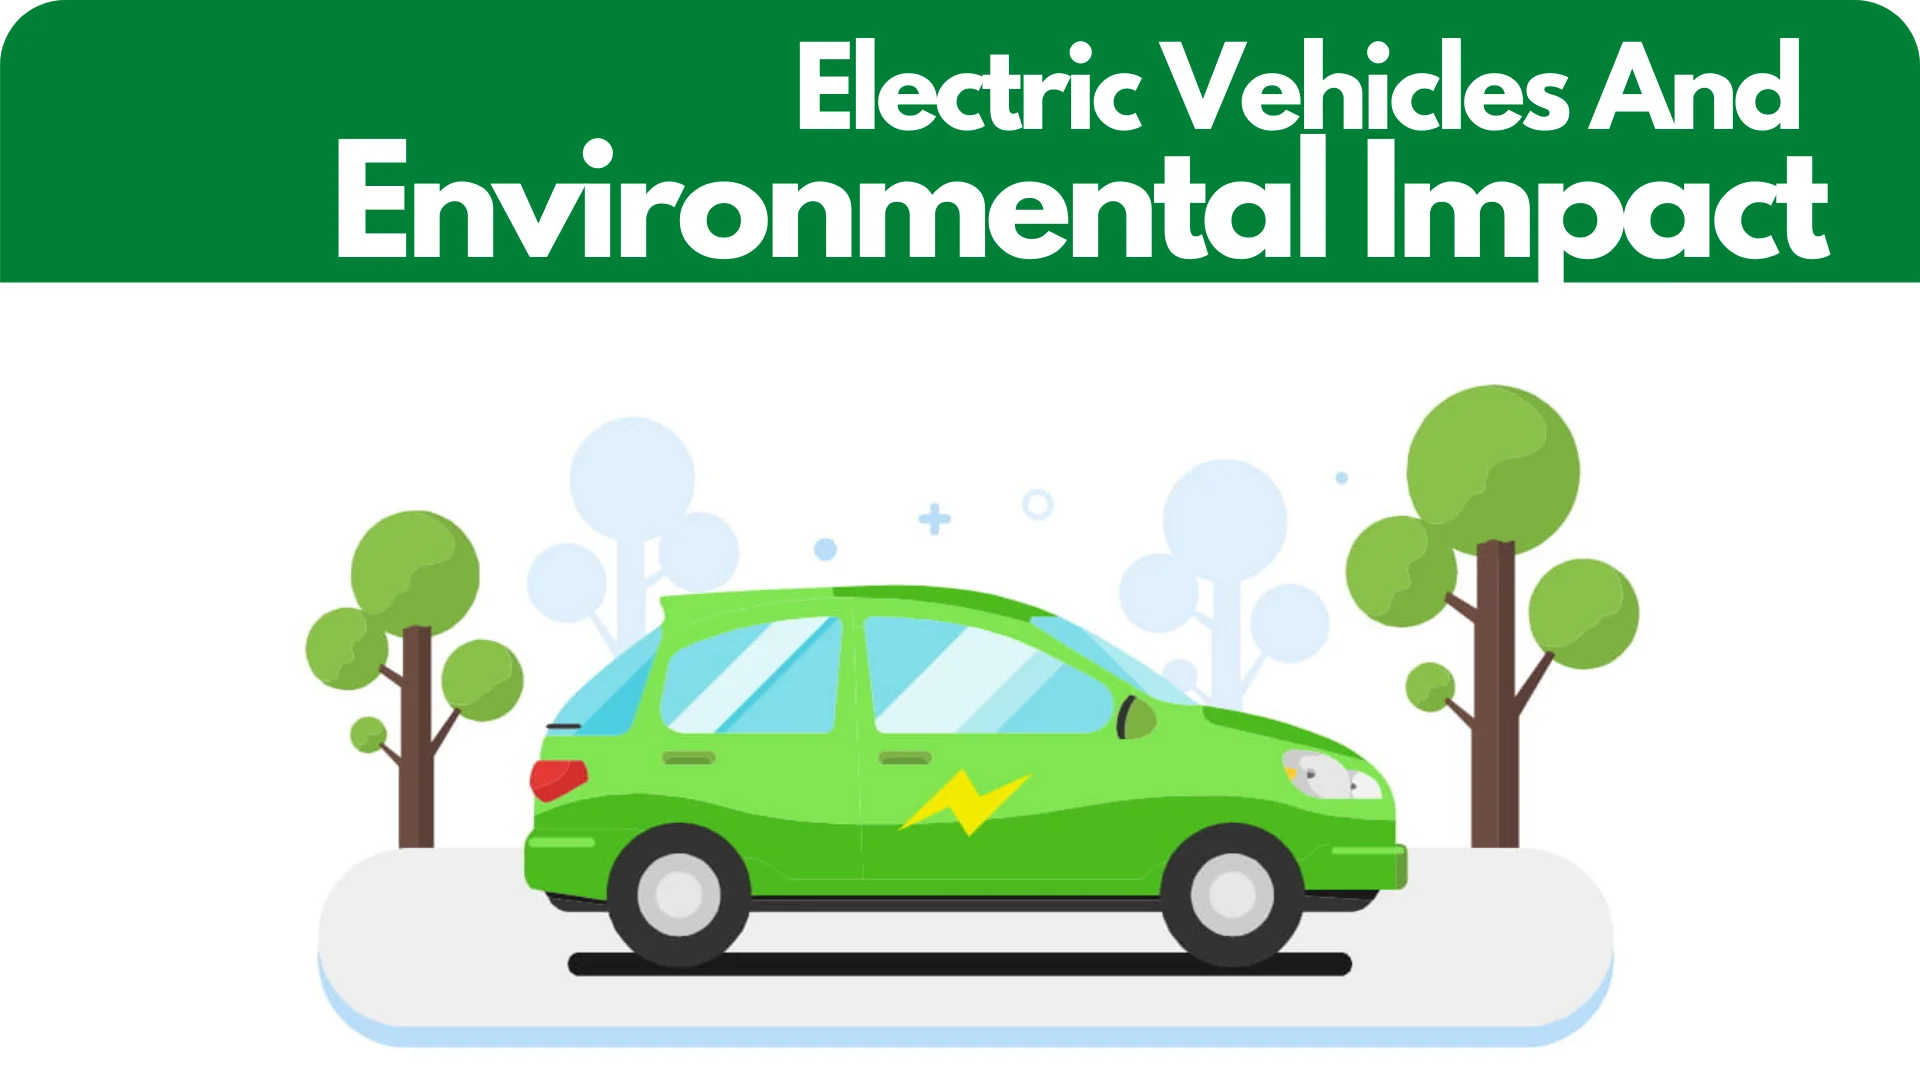 https://e-vehicleinfo.com/electric-vehicles-and-their-environmental-impact/